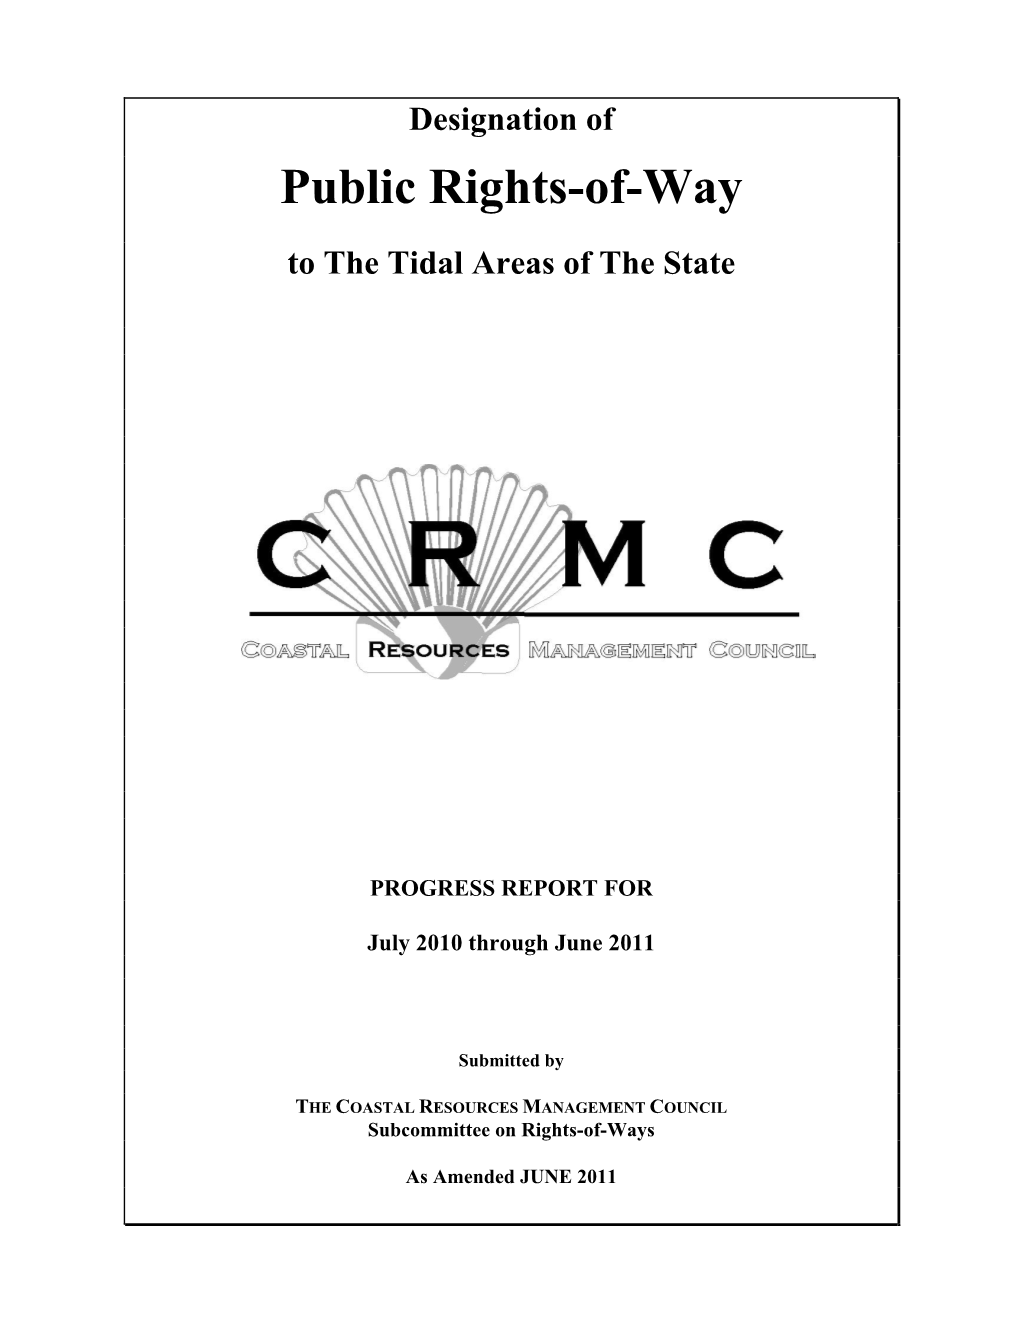 Public Rights-Of-Way to the Tidal Areas of the State